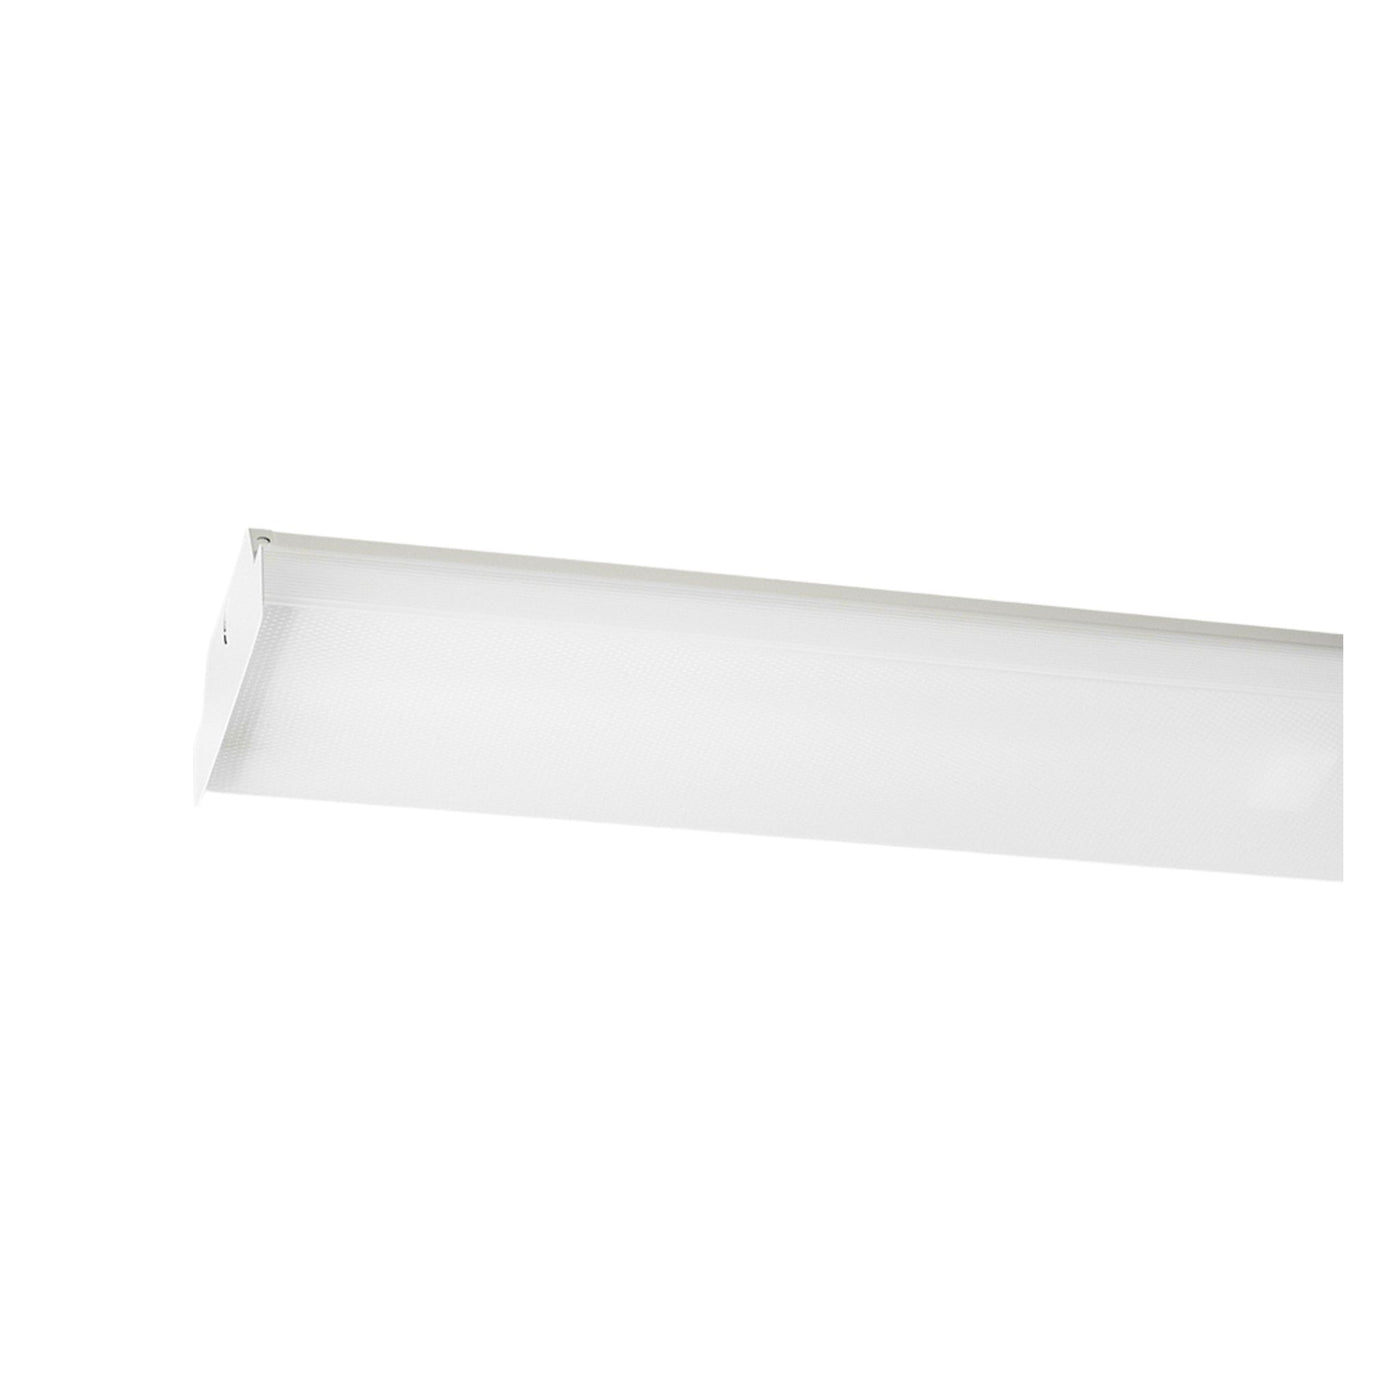 4FT LED Wraparound Light, 2860 to 5200 Lumens, 22W or 40W, Dimmable, 4000K or 5000K, 120-277V